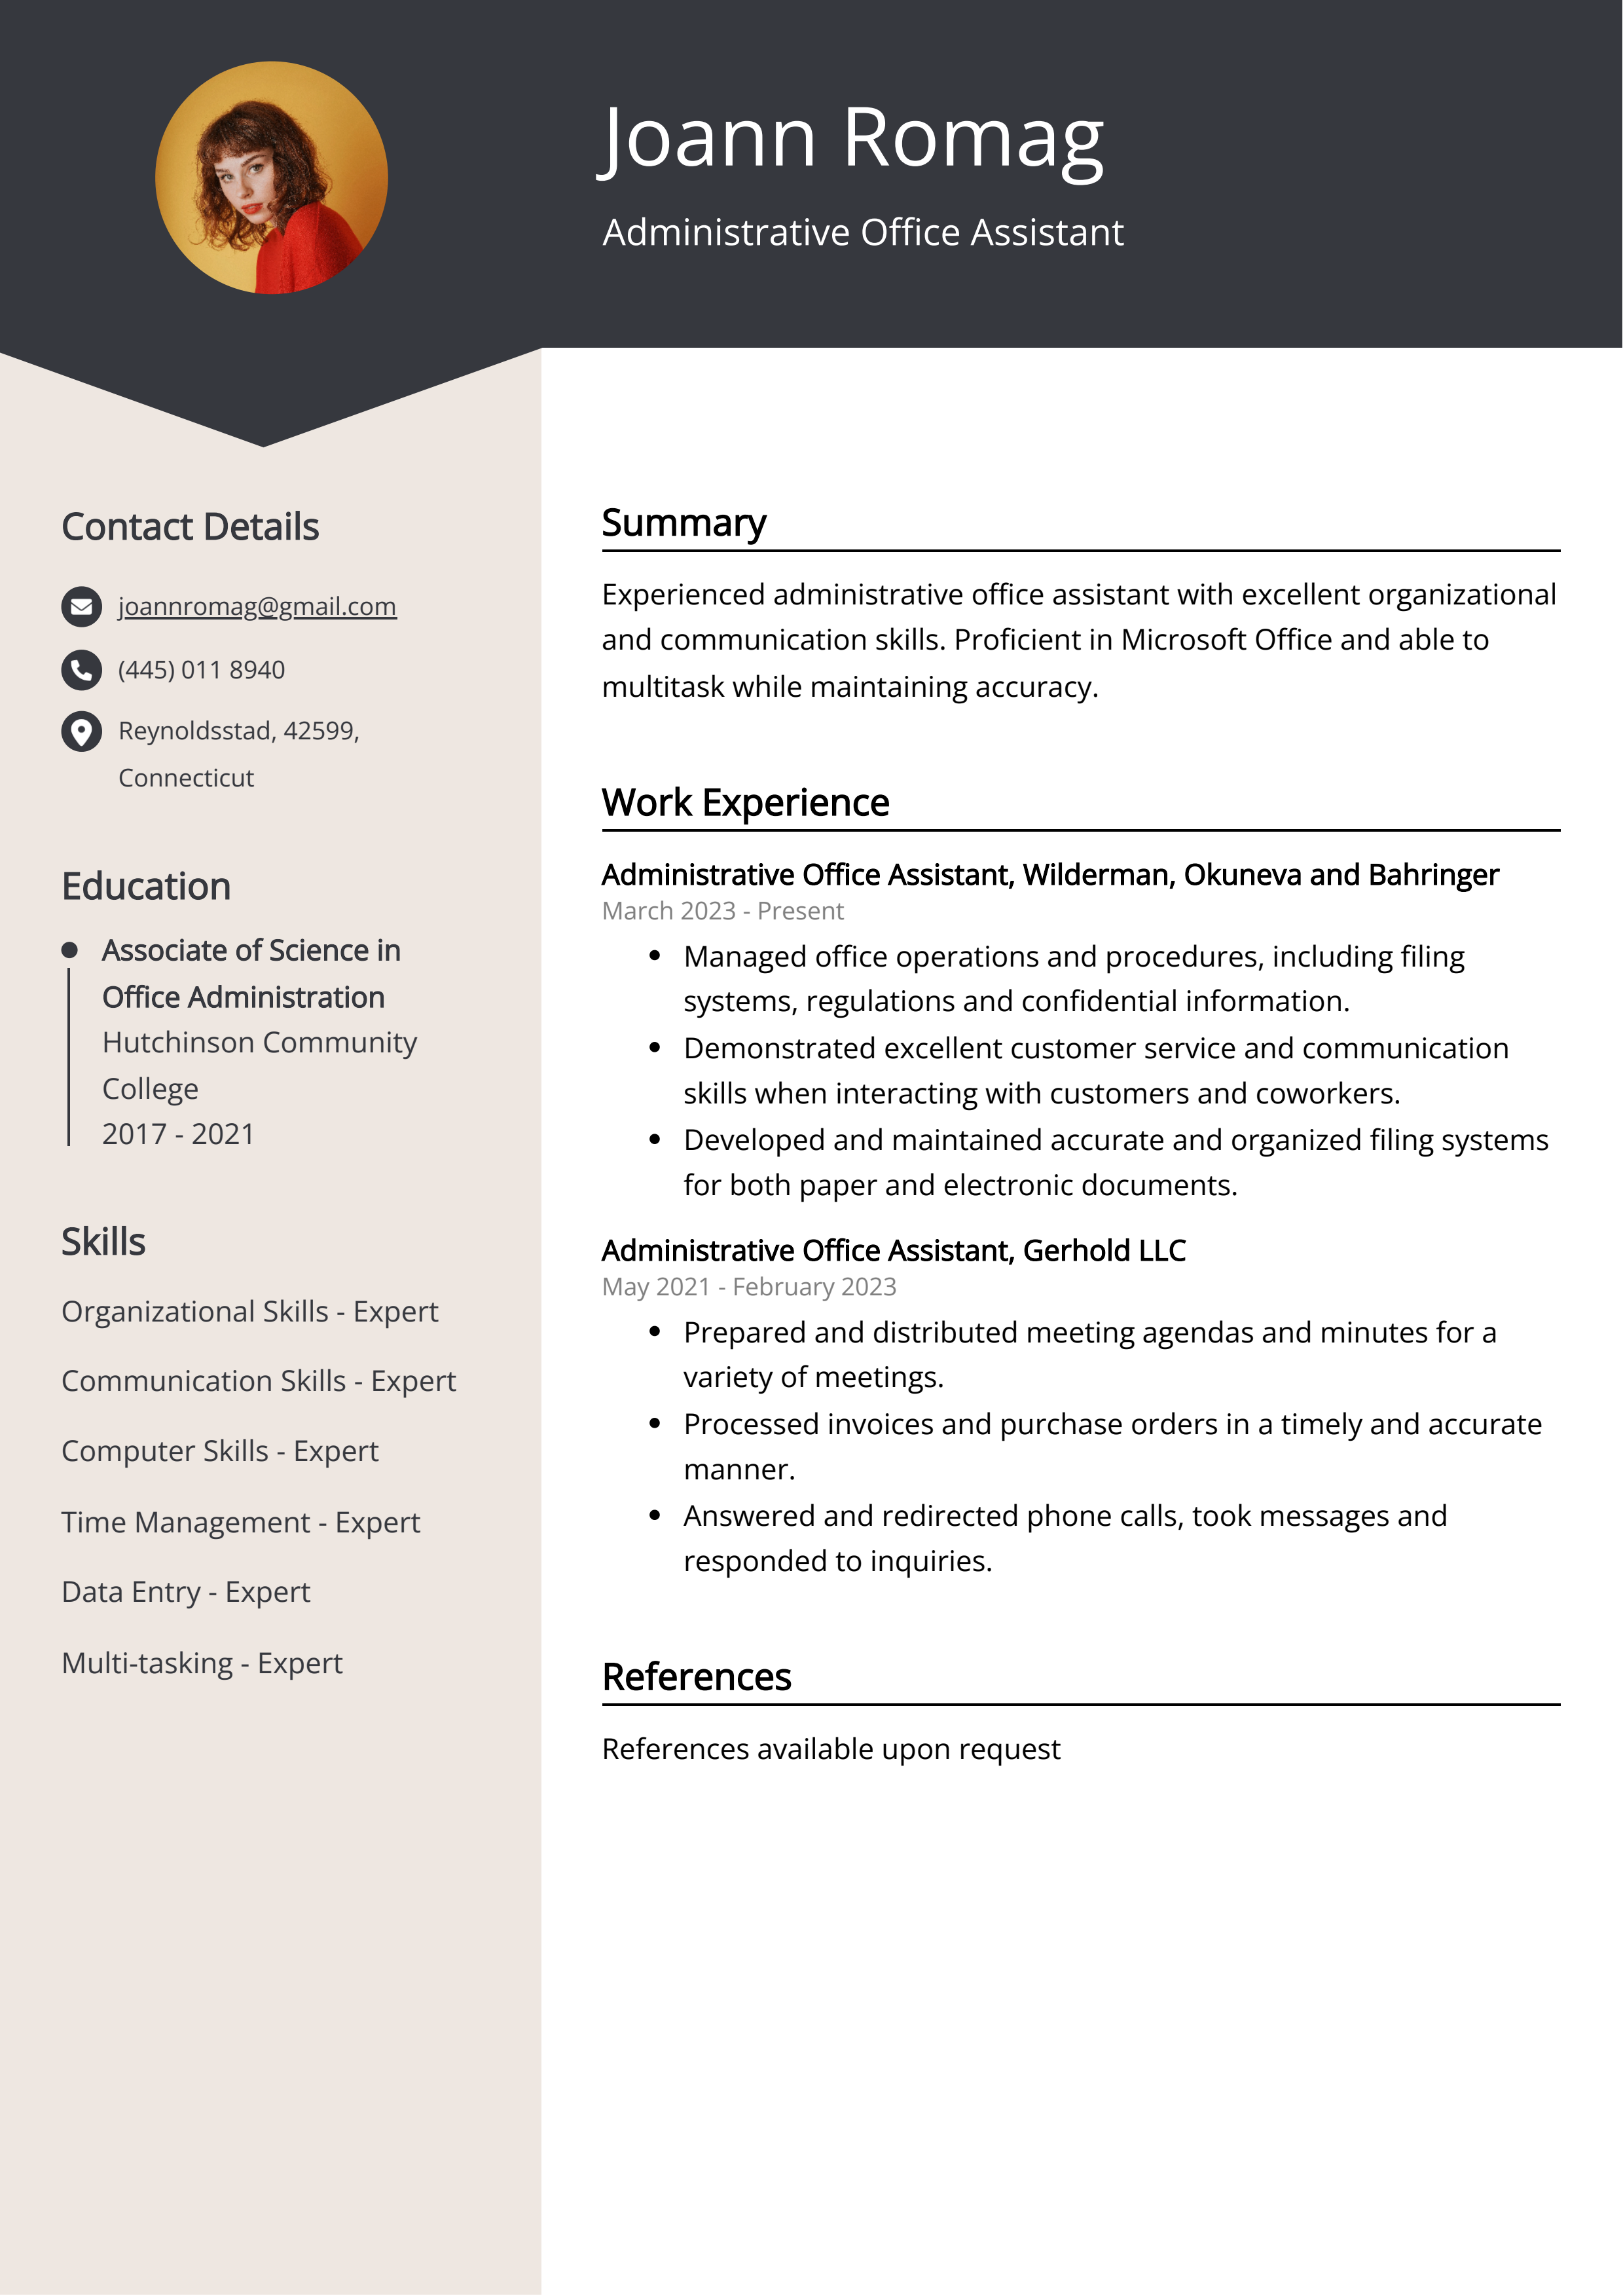 Administrative Office Assistant CV Example